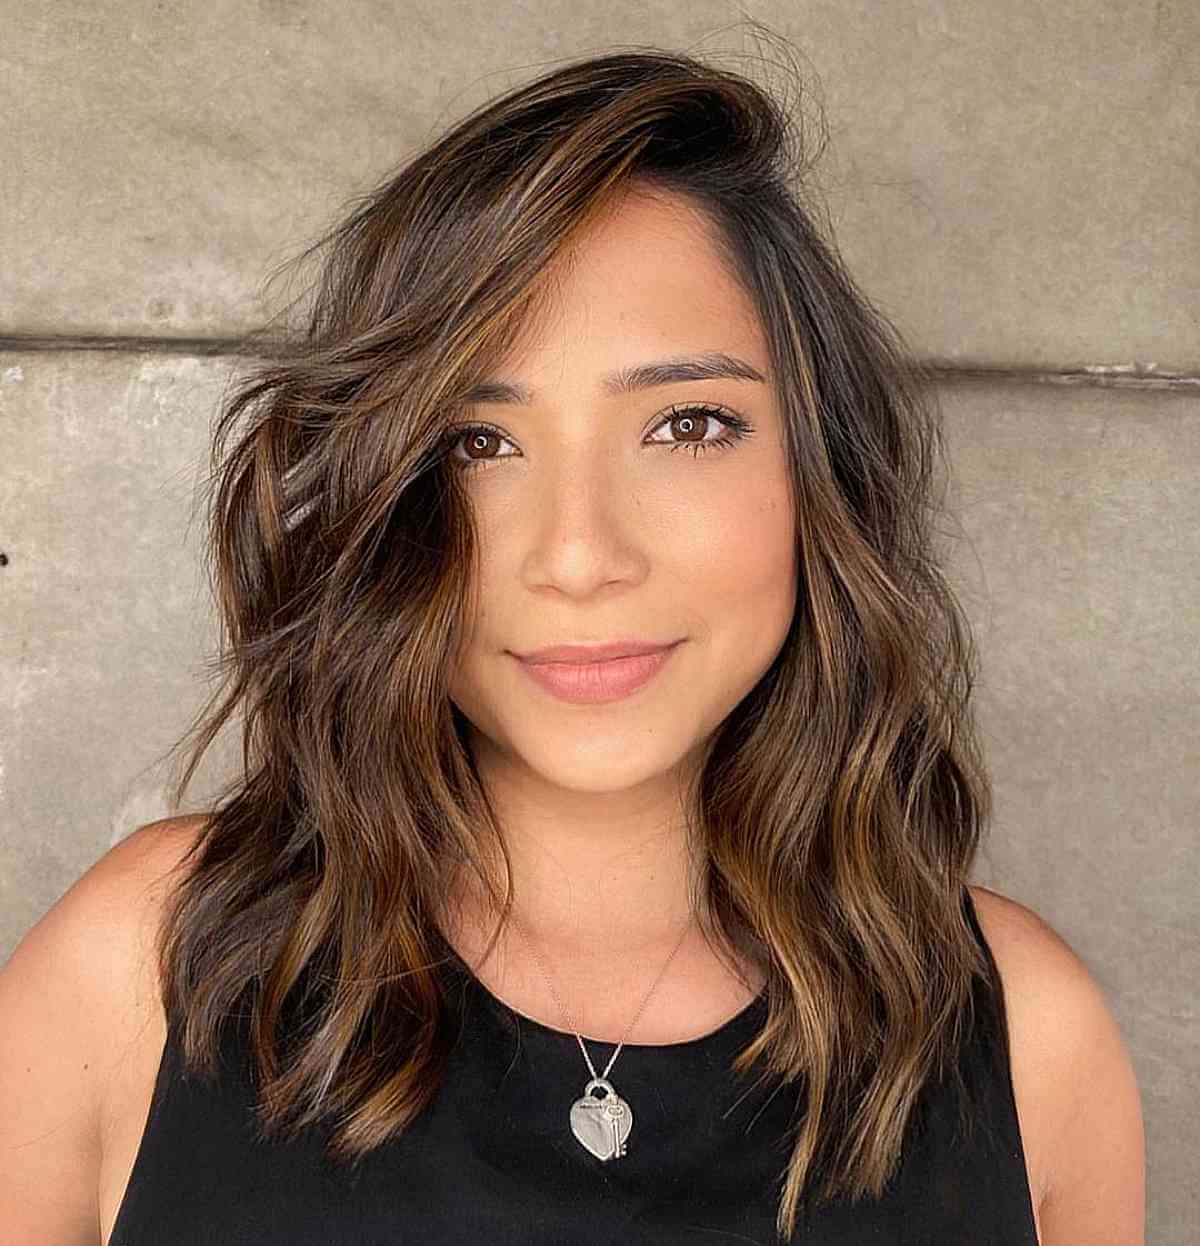 71 Impressive Deep Side Part Hairstyles To Pull Off a Simple Yet Stunning Look